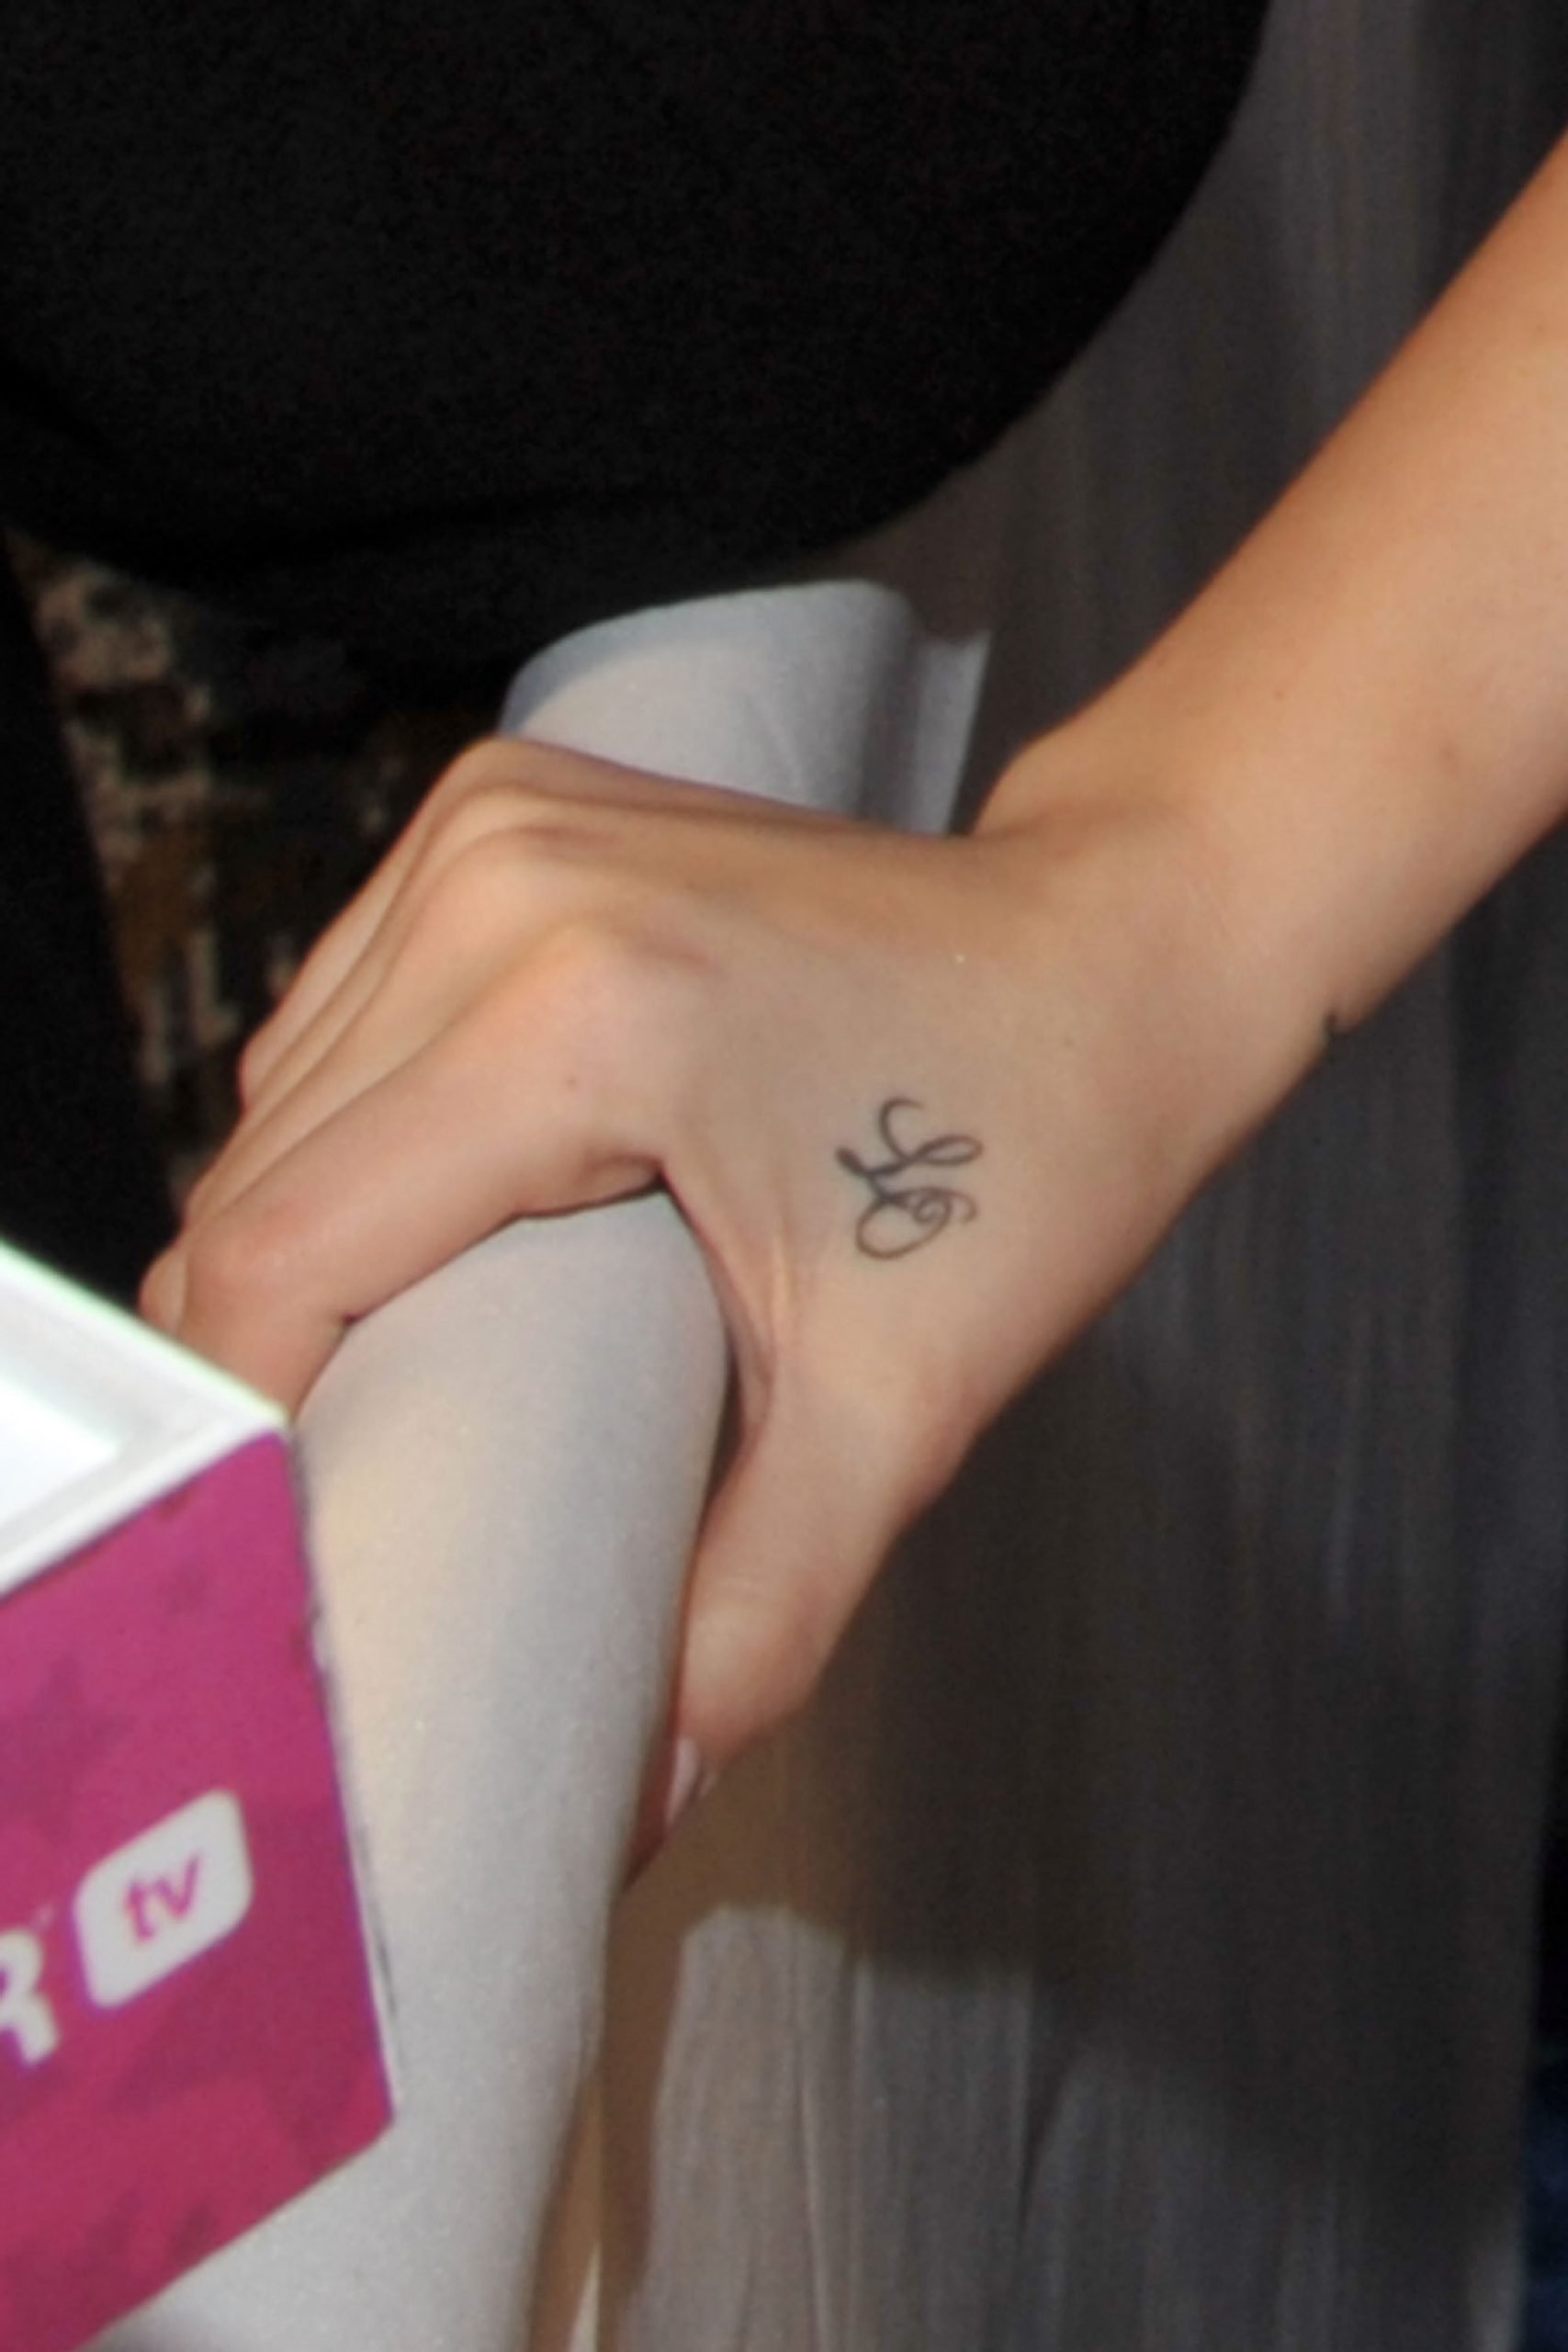 A detail shot of Khloe Kardashian's Lamar Odom tattoo as she arrives at the 2011 People's Choice Awards at Nokia Theatre L.A. Live on January 5, 2011 in Los Angeles, California.